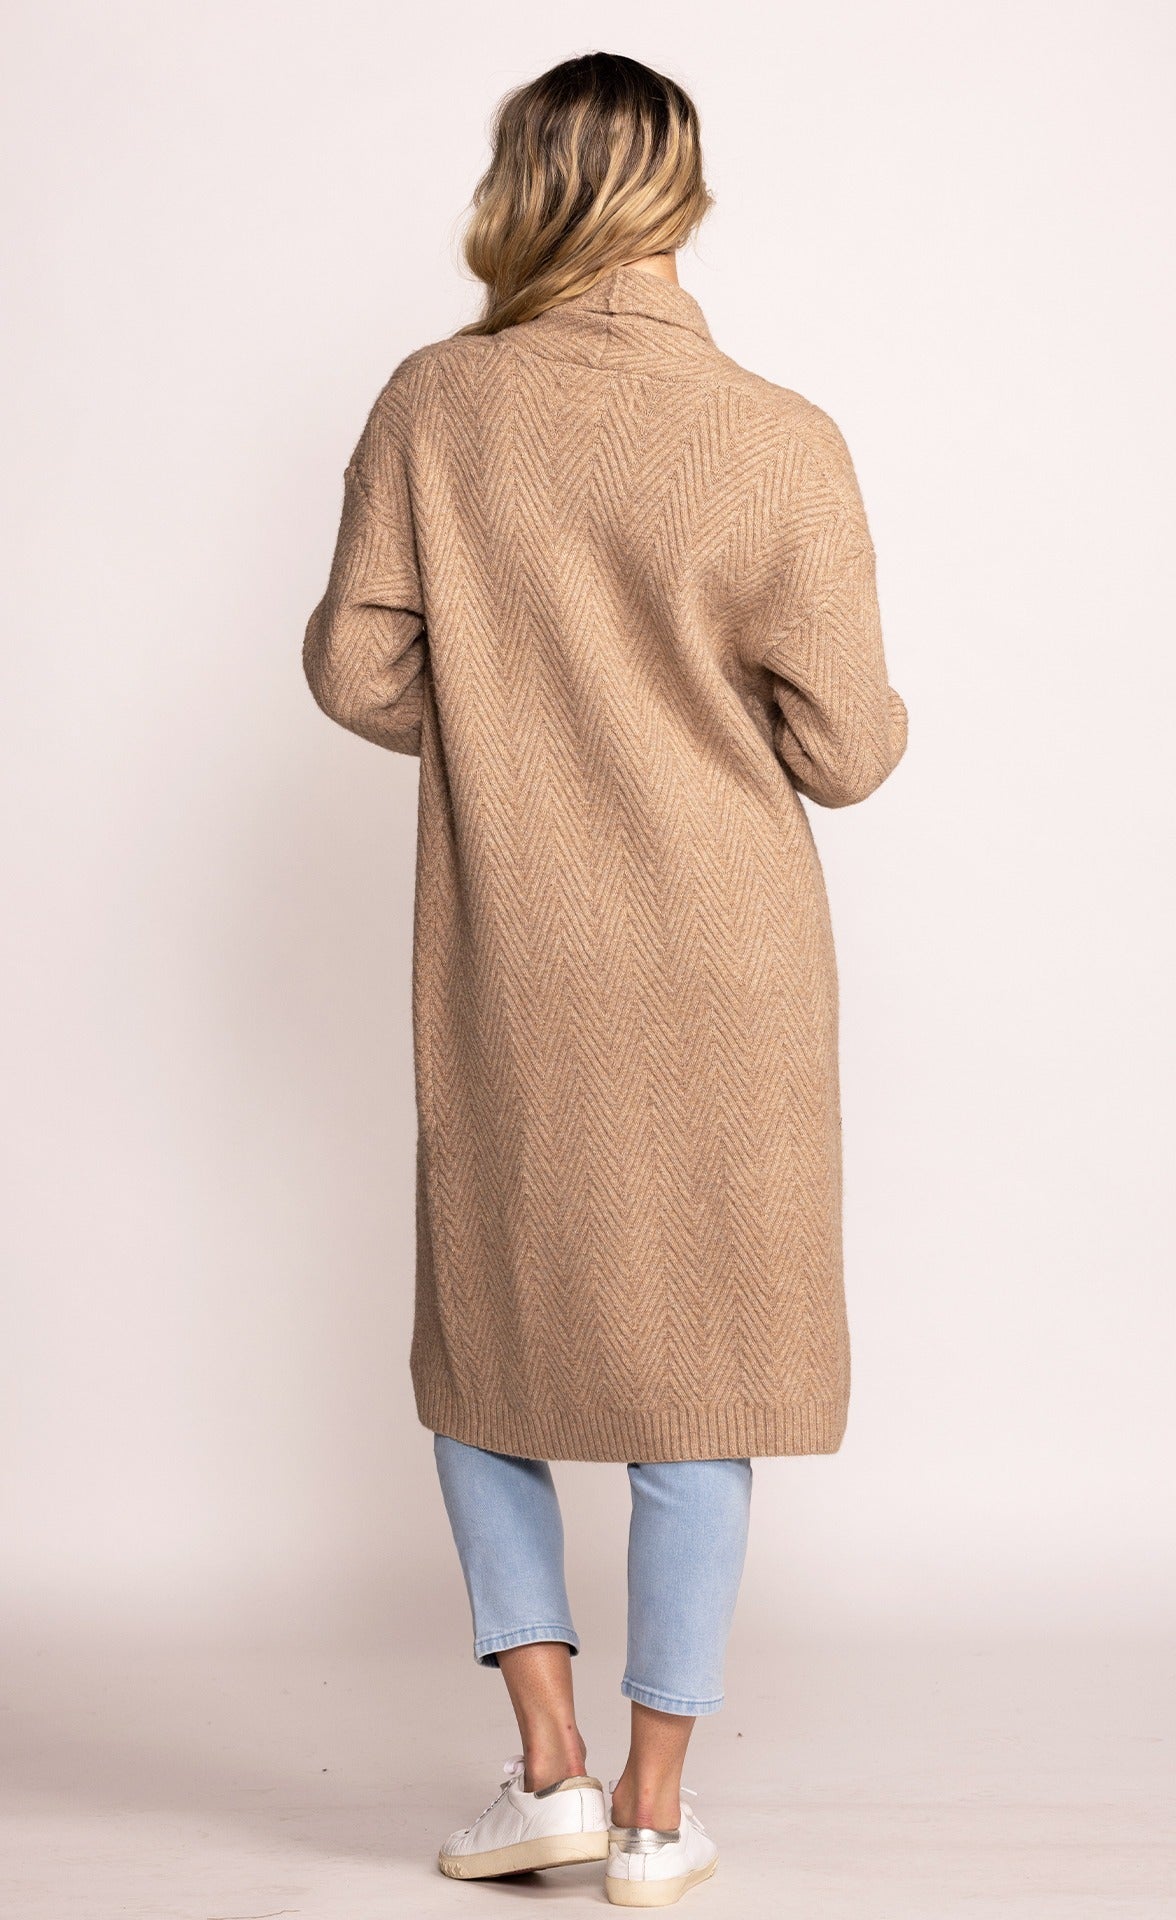 Key To Happiness Knit Duster Cardigan in Light Beige • Impressions